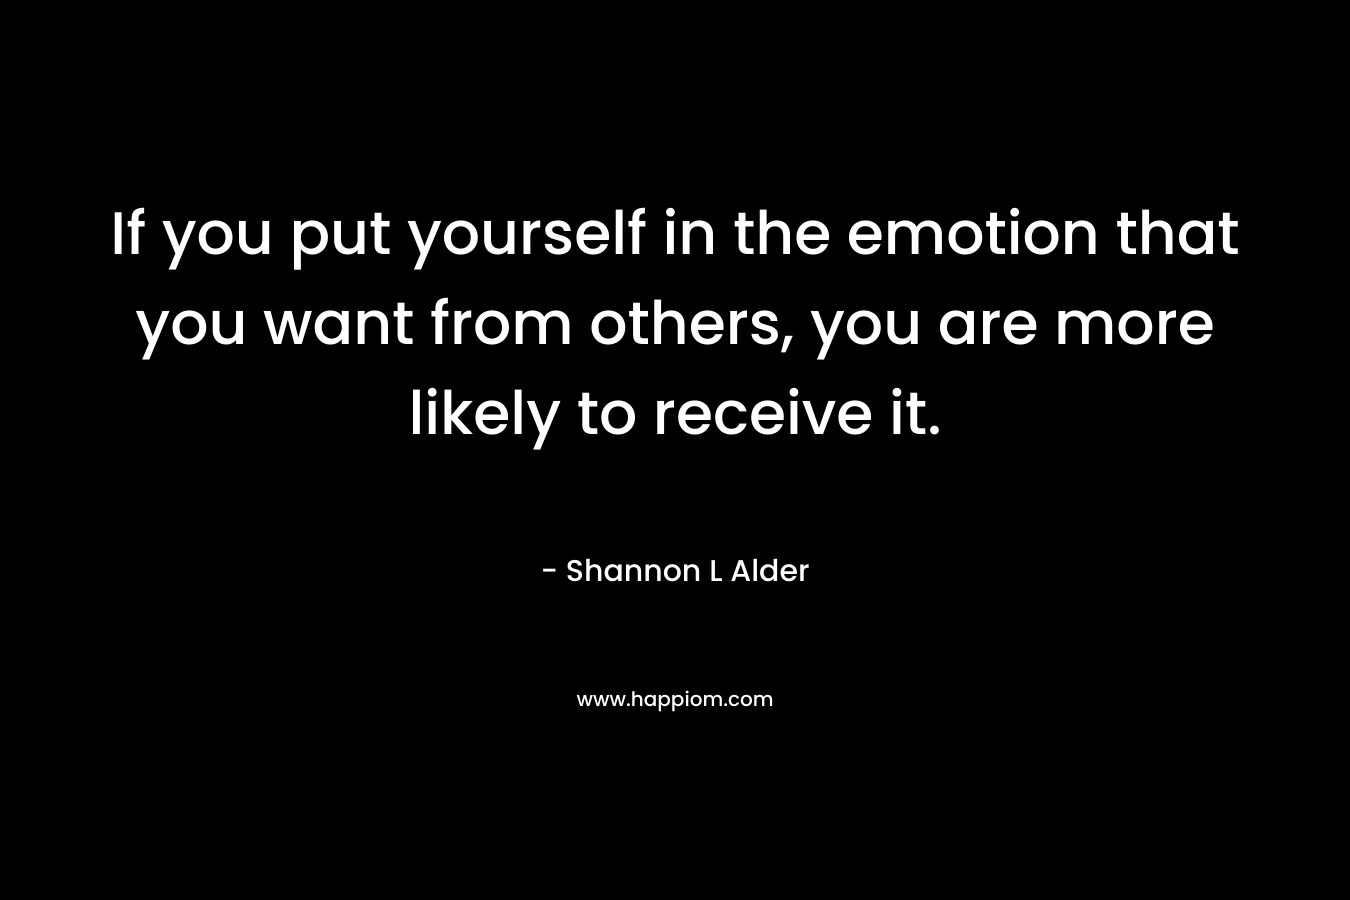 If you put yourself in the emotion that you want from others, you are more likely to receive it.